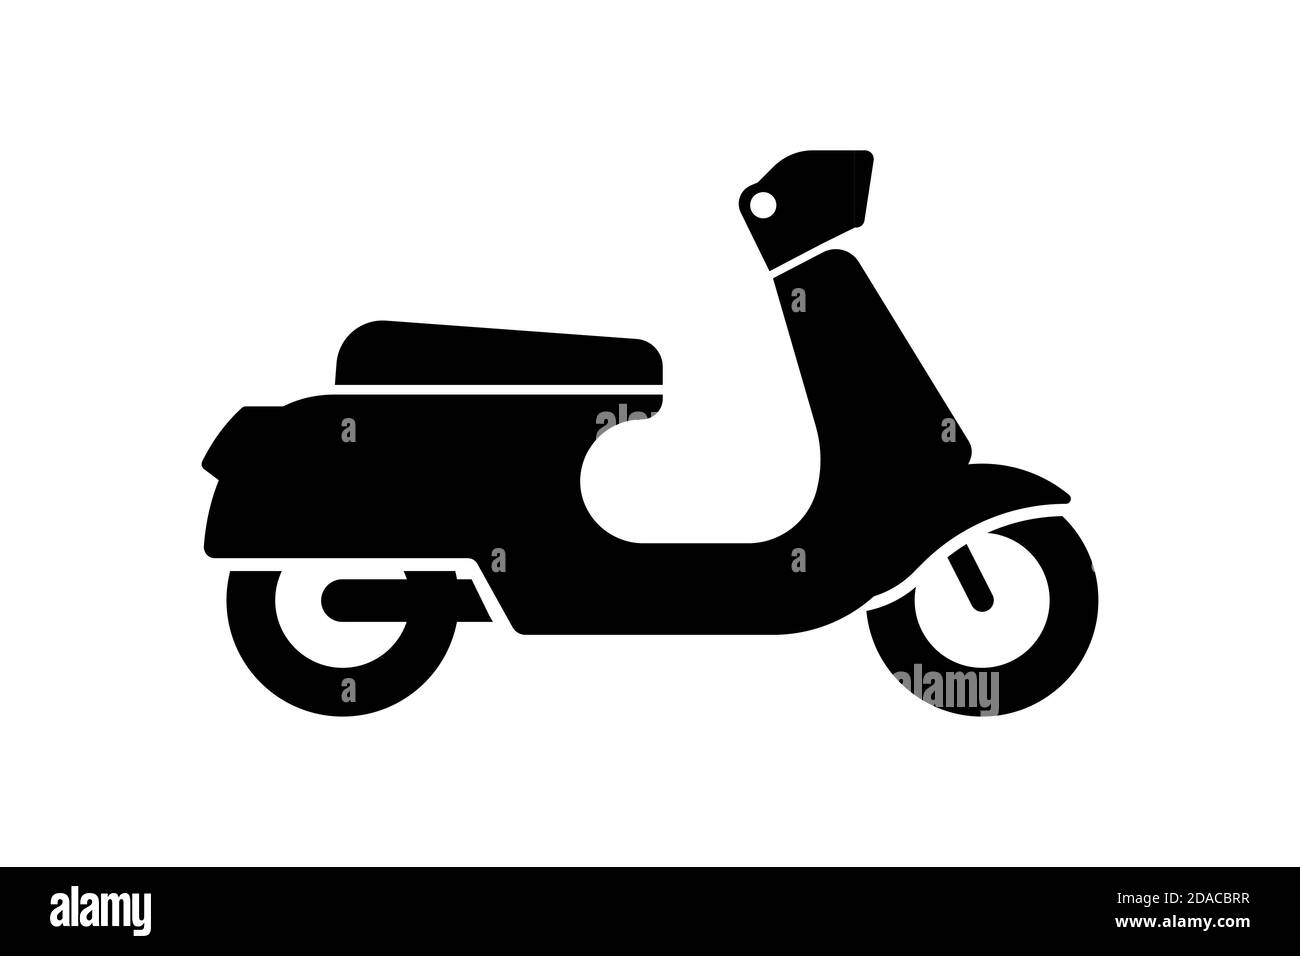 Retro vintage scooter black icon isolated on white bacground. Traditional recreational motorcycle transport road sign. Moped delivery symbol vector eps illustration Stock Vector